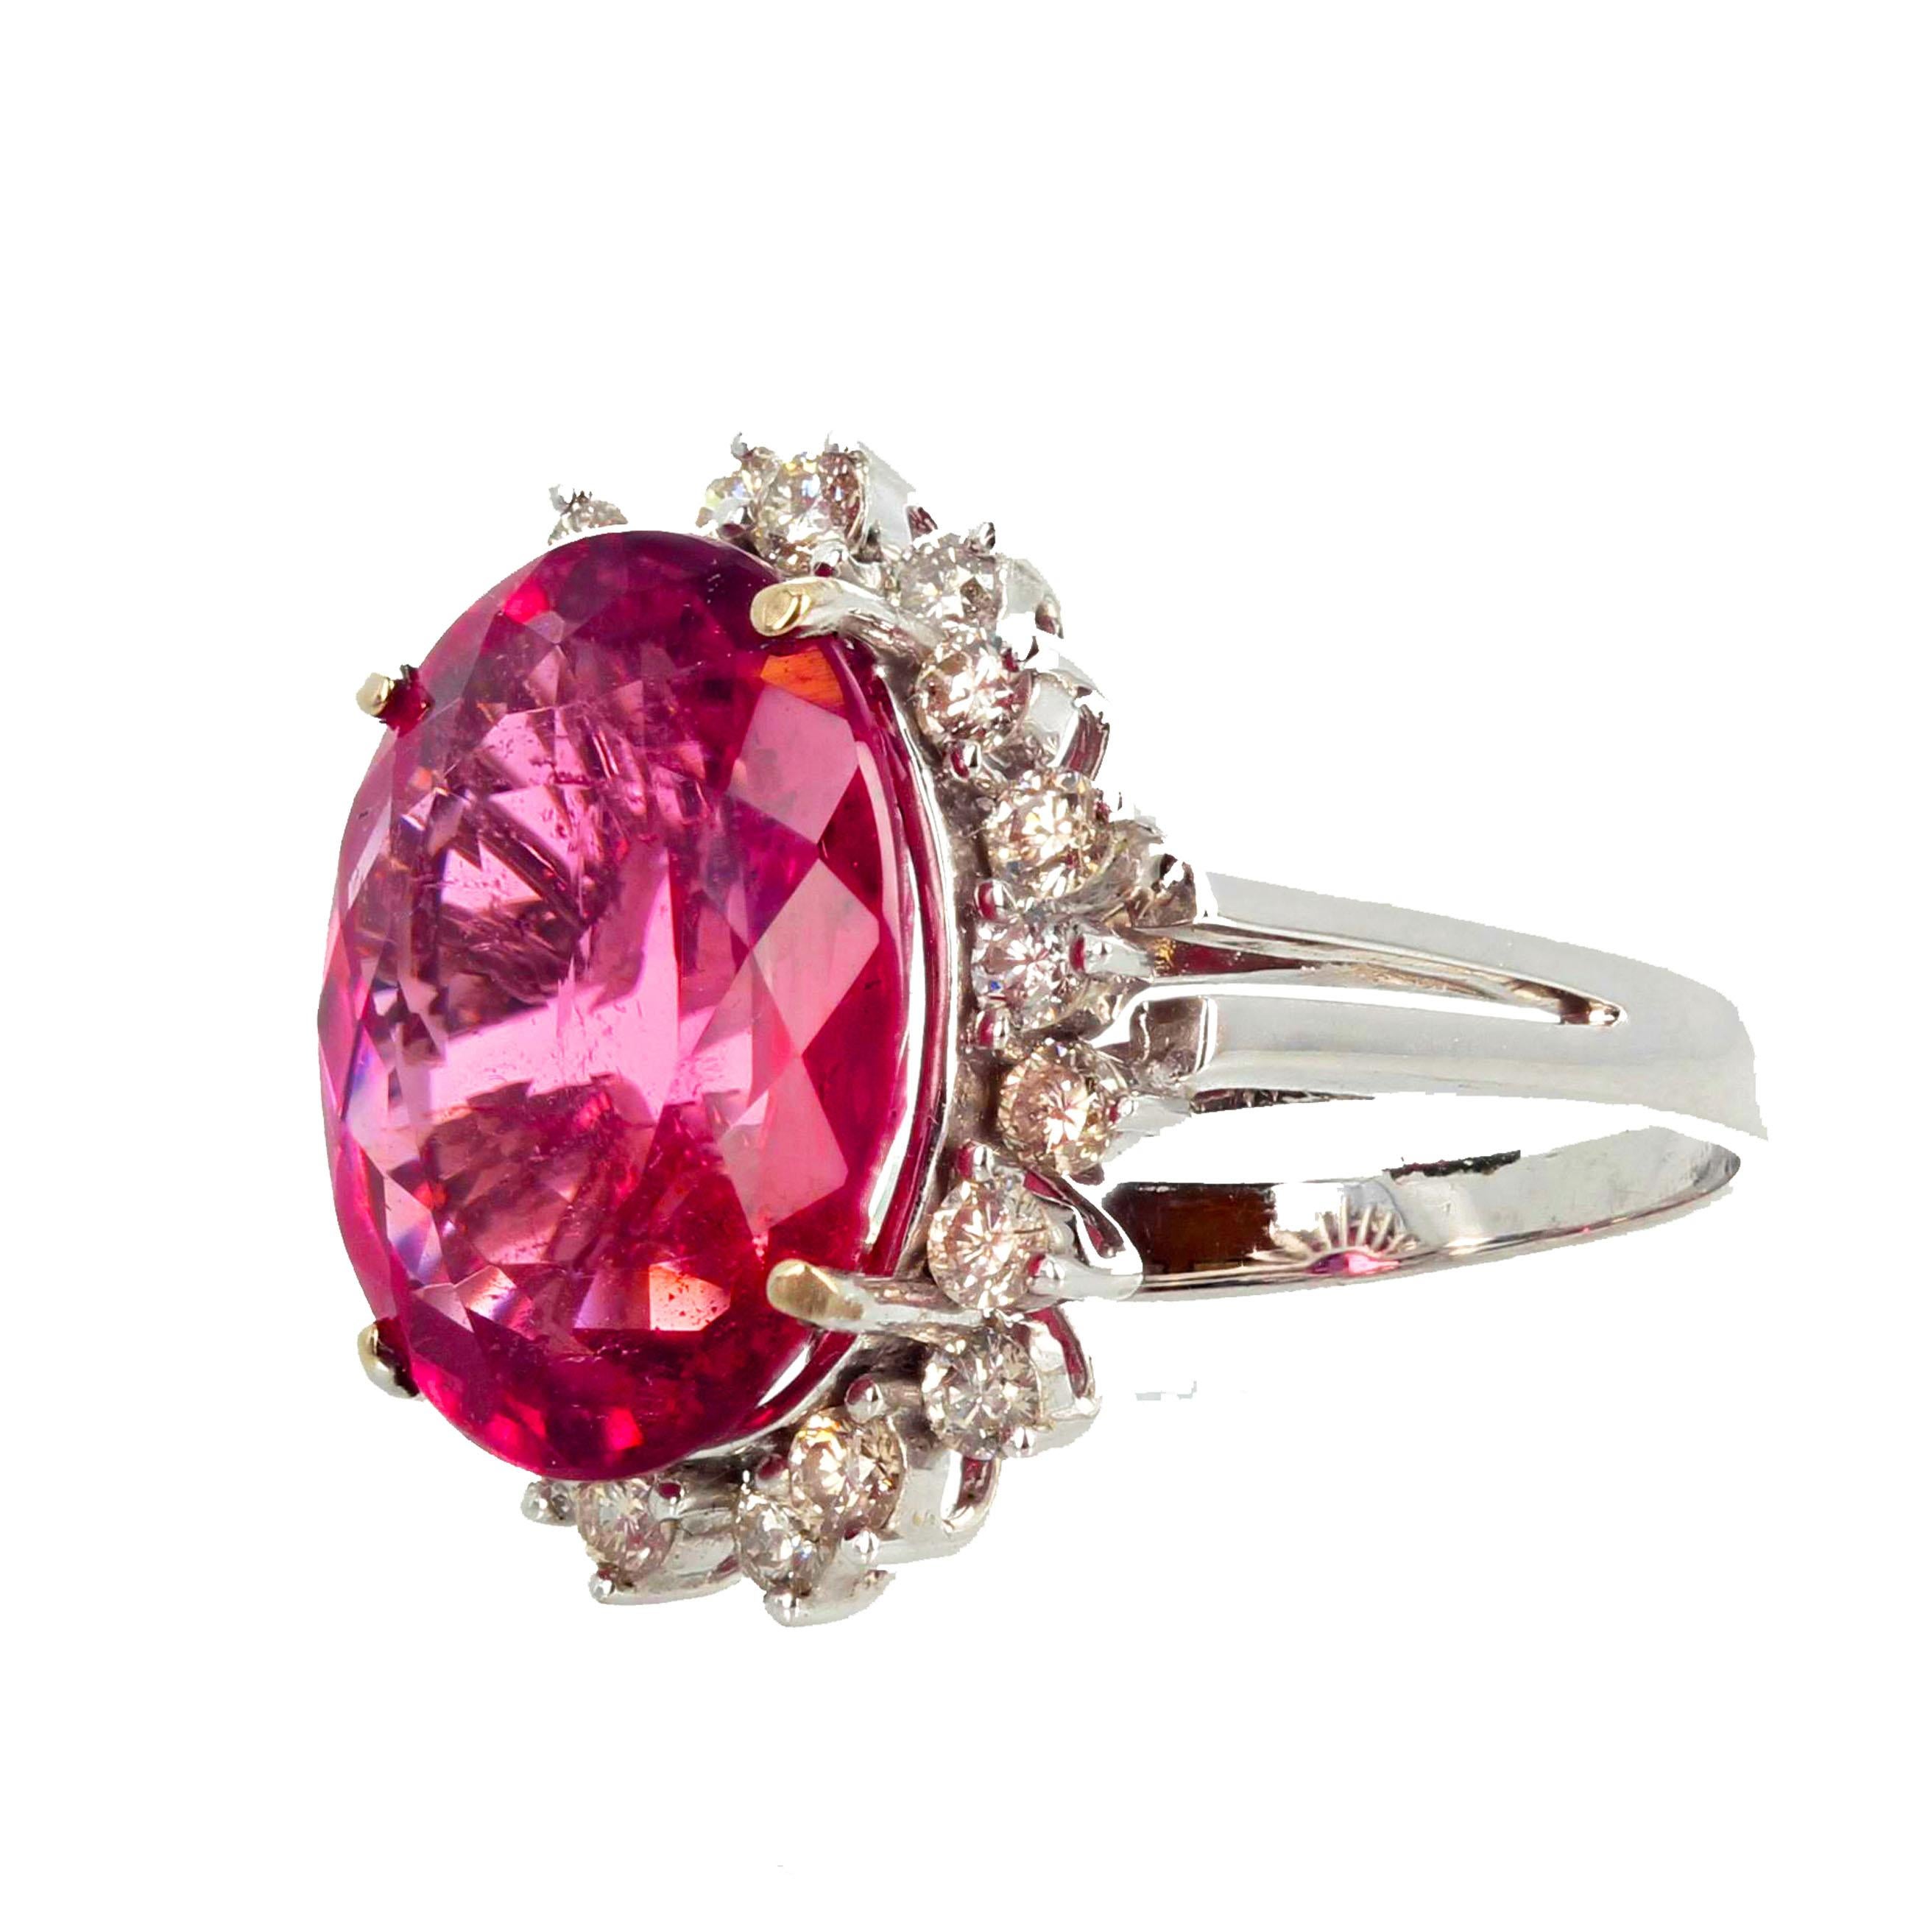 Oval Cut AJD GORGEOUS Brilliant Red 6.5 Ct Rubelite Tourmaline & Diamonds Gold Ring For Sale